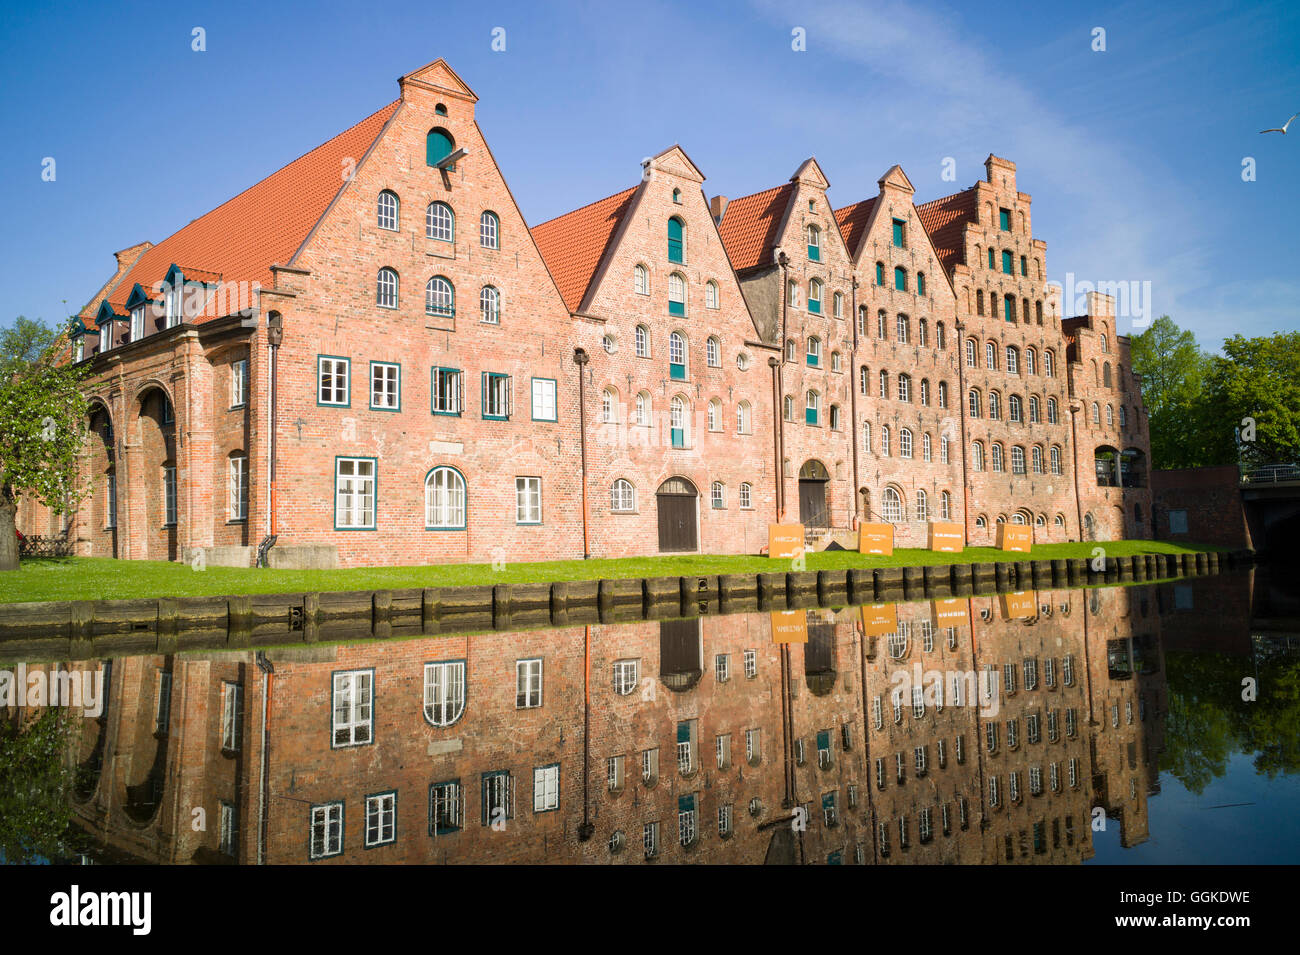 Salt storehouses on the river Trave, Lubeck, Schleswig-Holstein, Germany Stock Photo